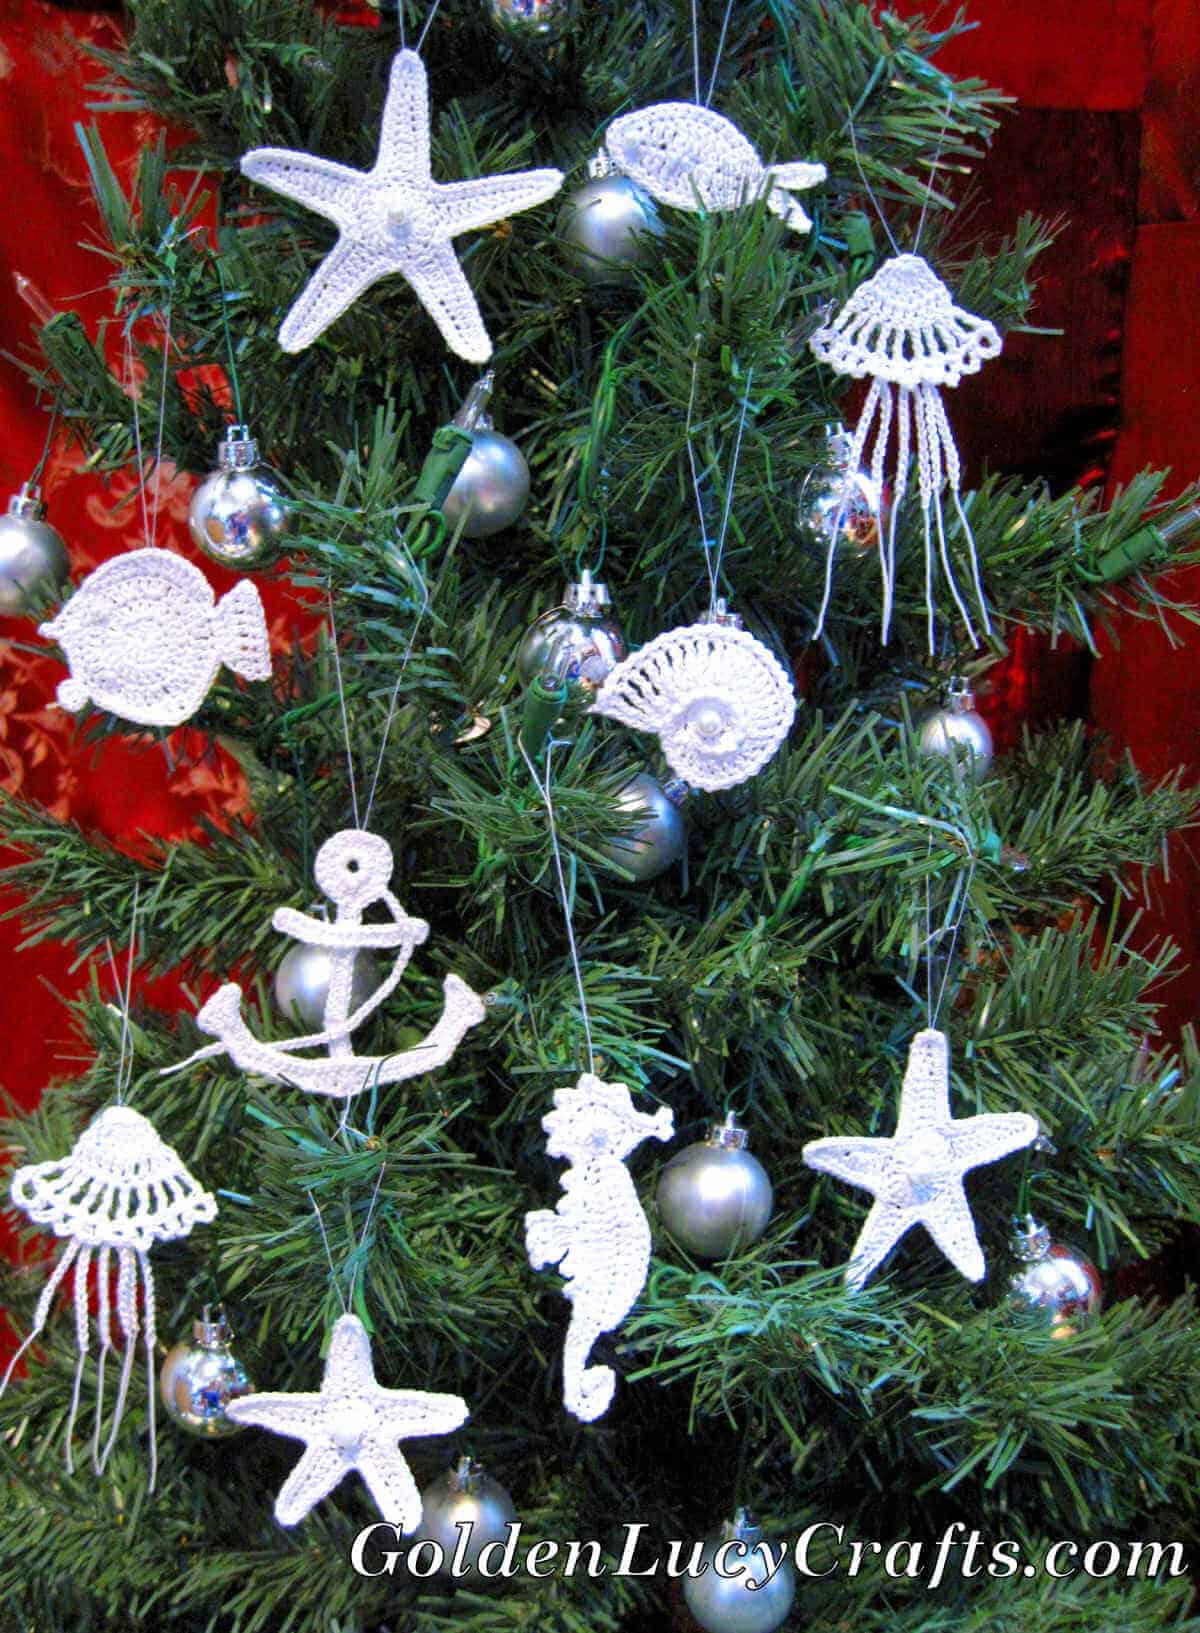 Christmas tree embellished with sea motifs crochet ornaments.